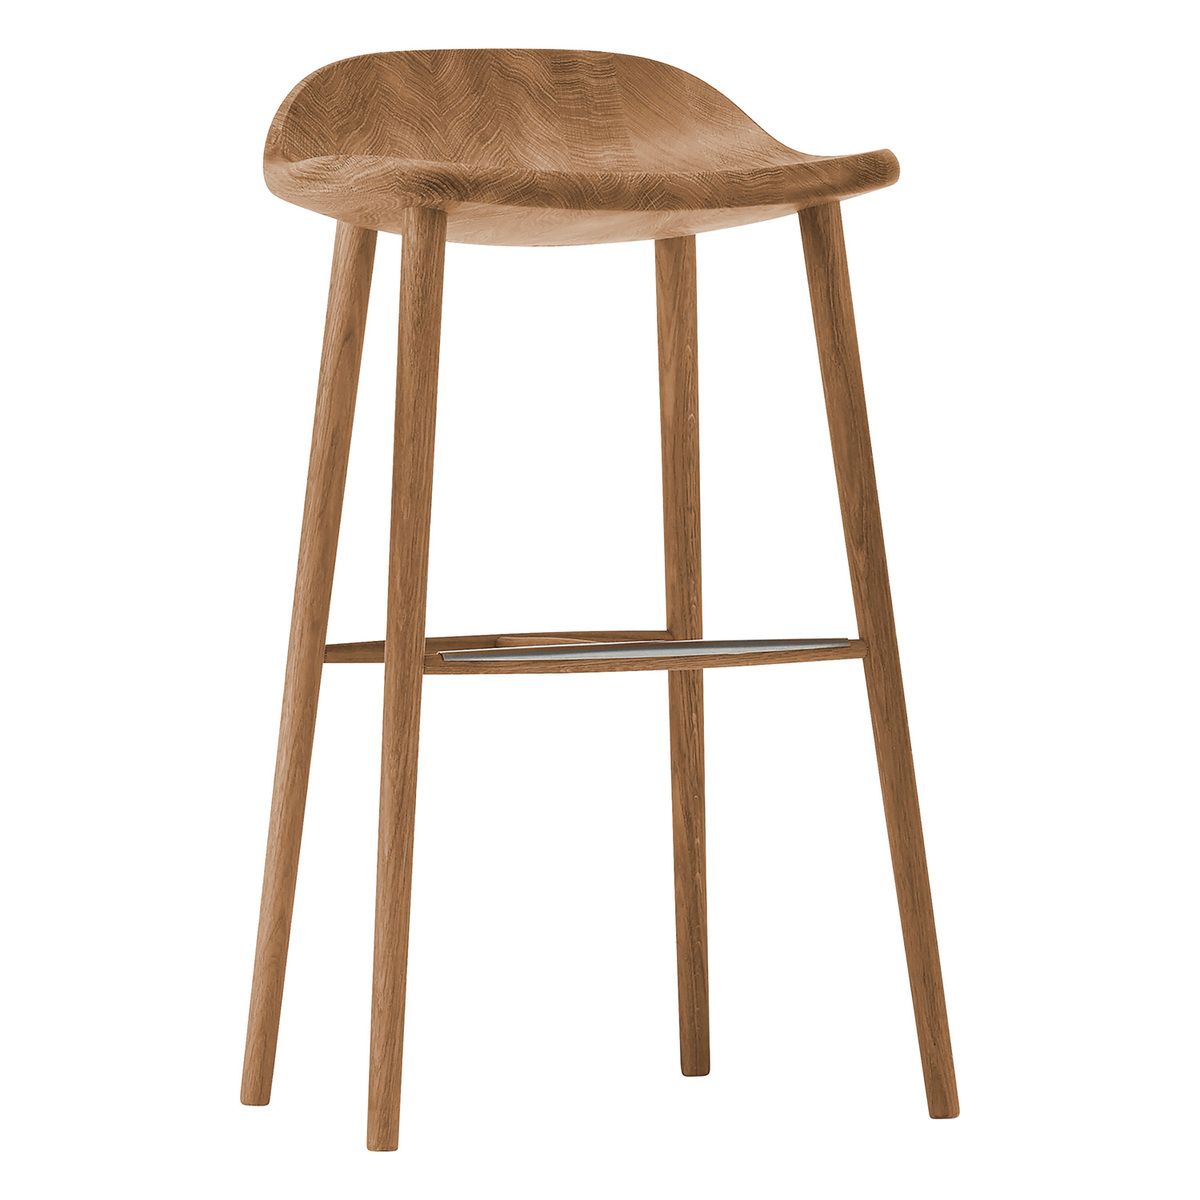 Wooden stools- Benefits of wooden stools
for furniture products